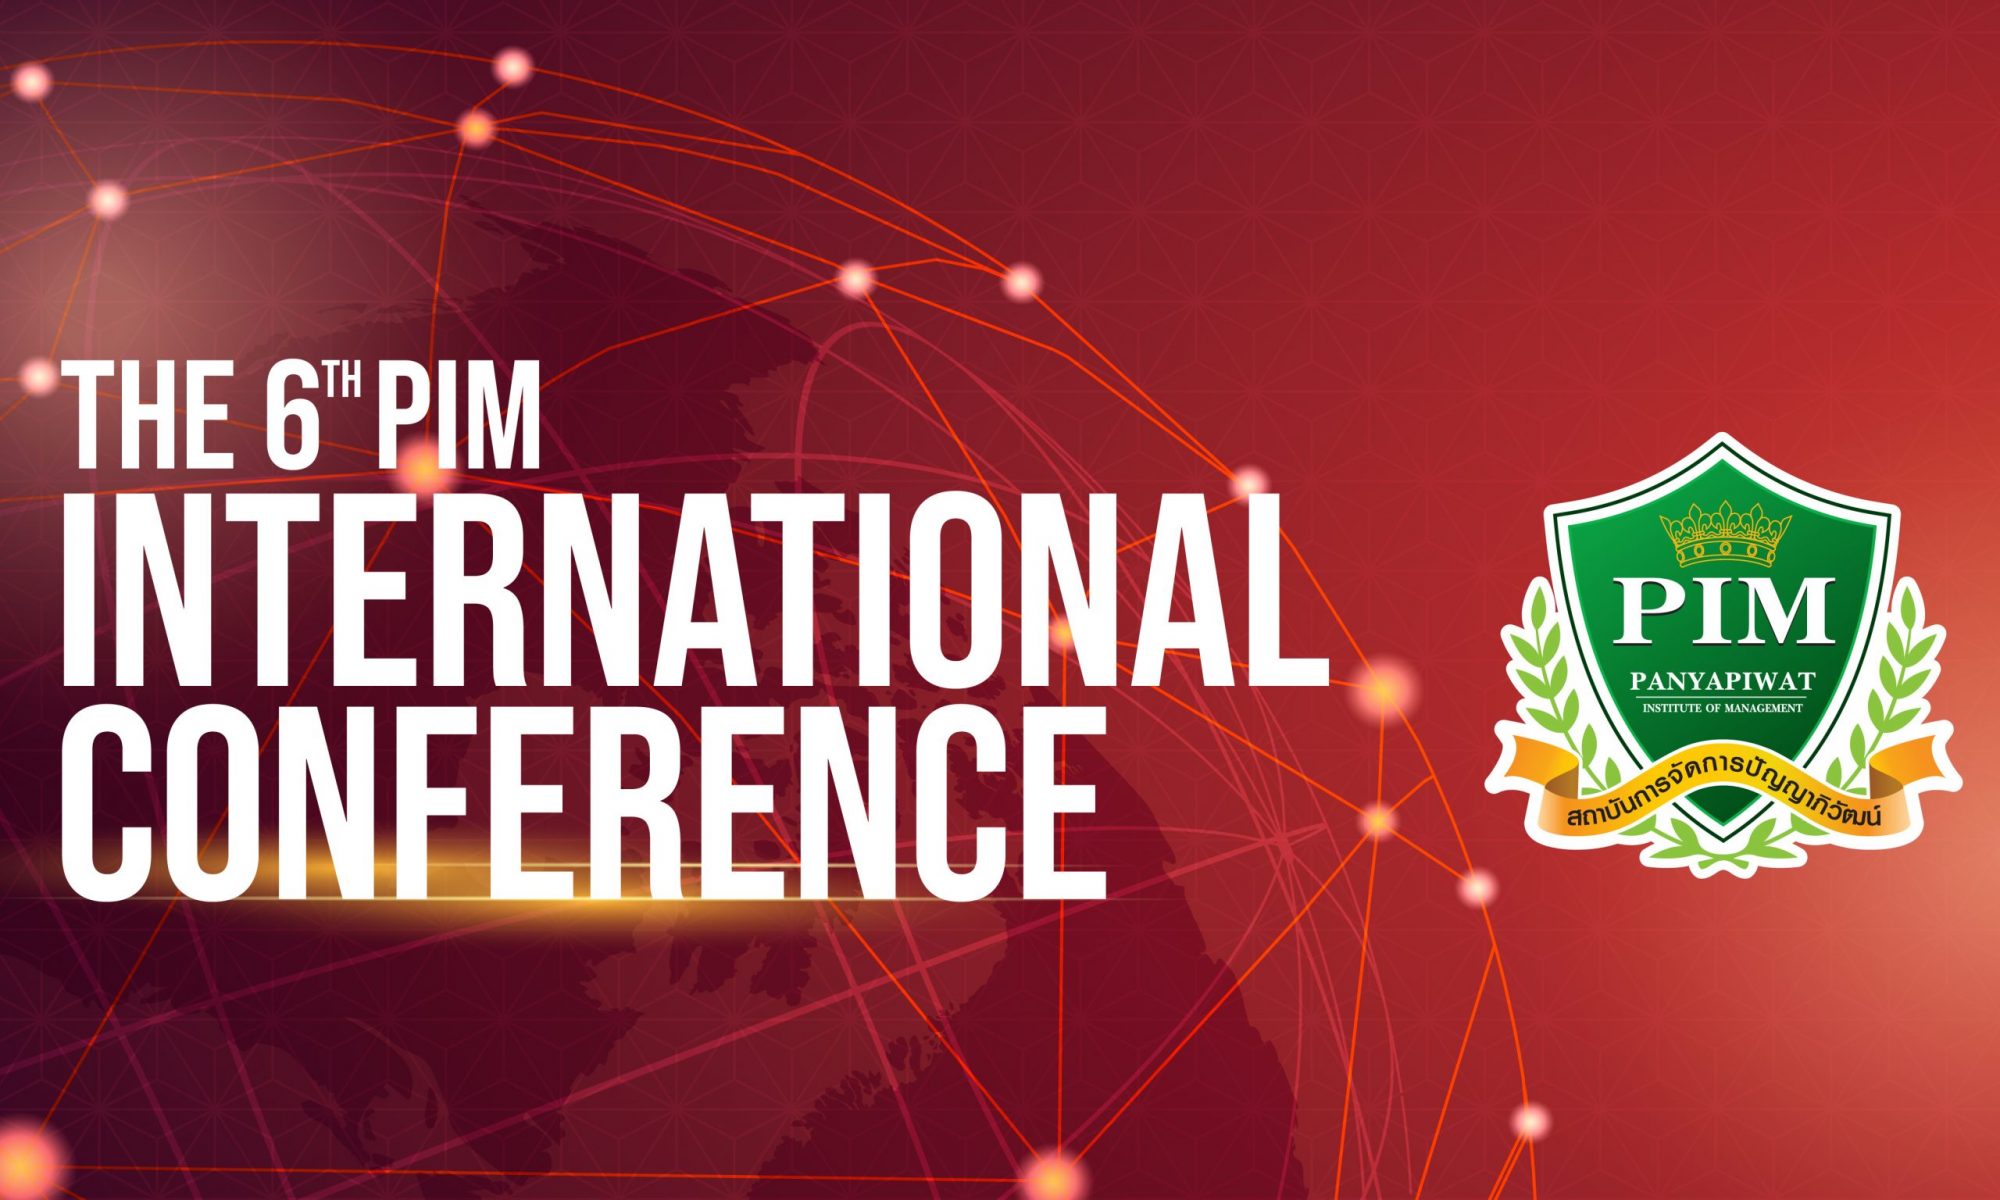 The 6th PIM International Conference